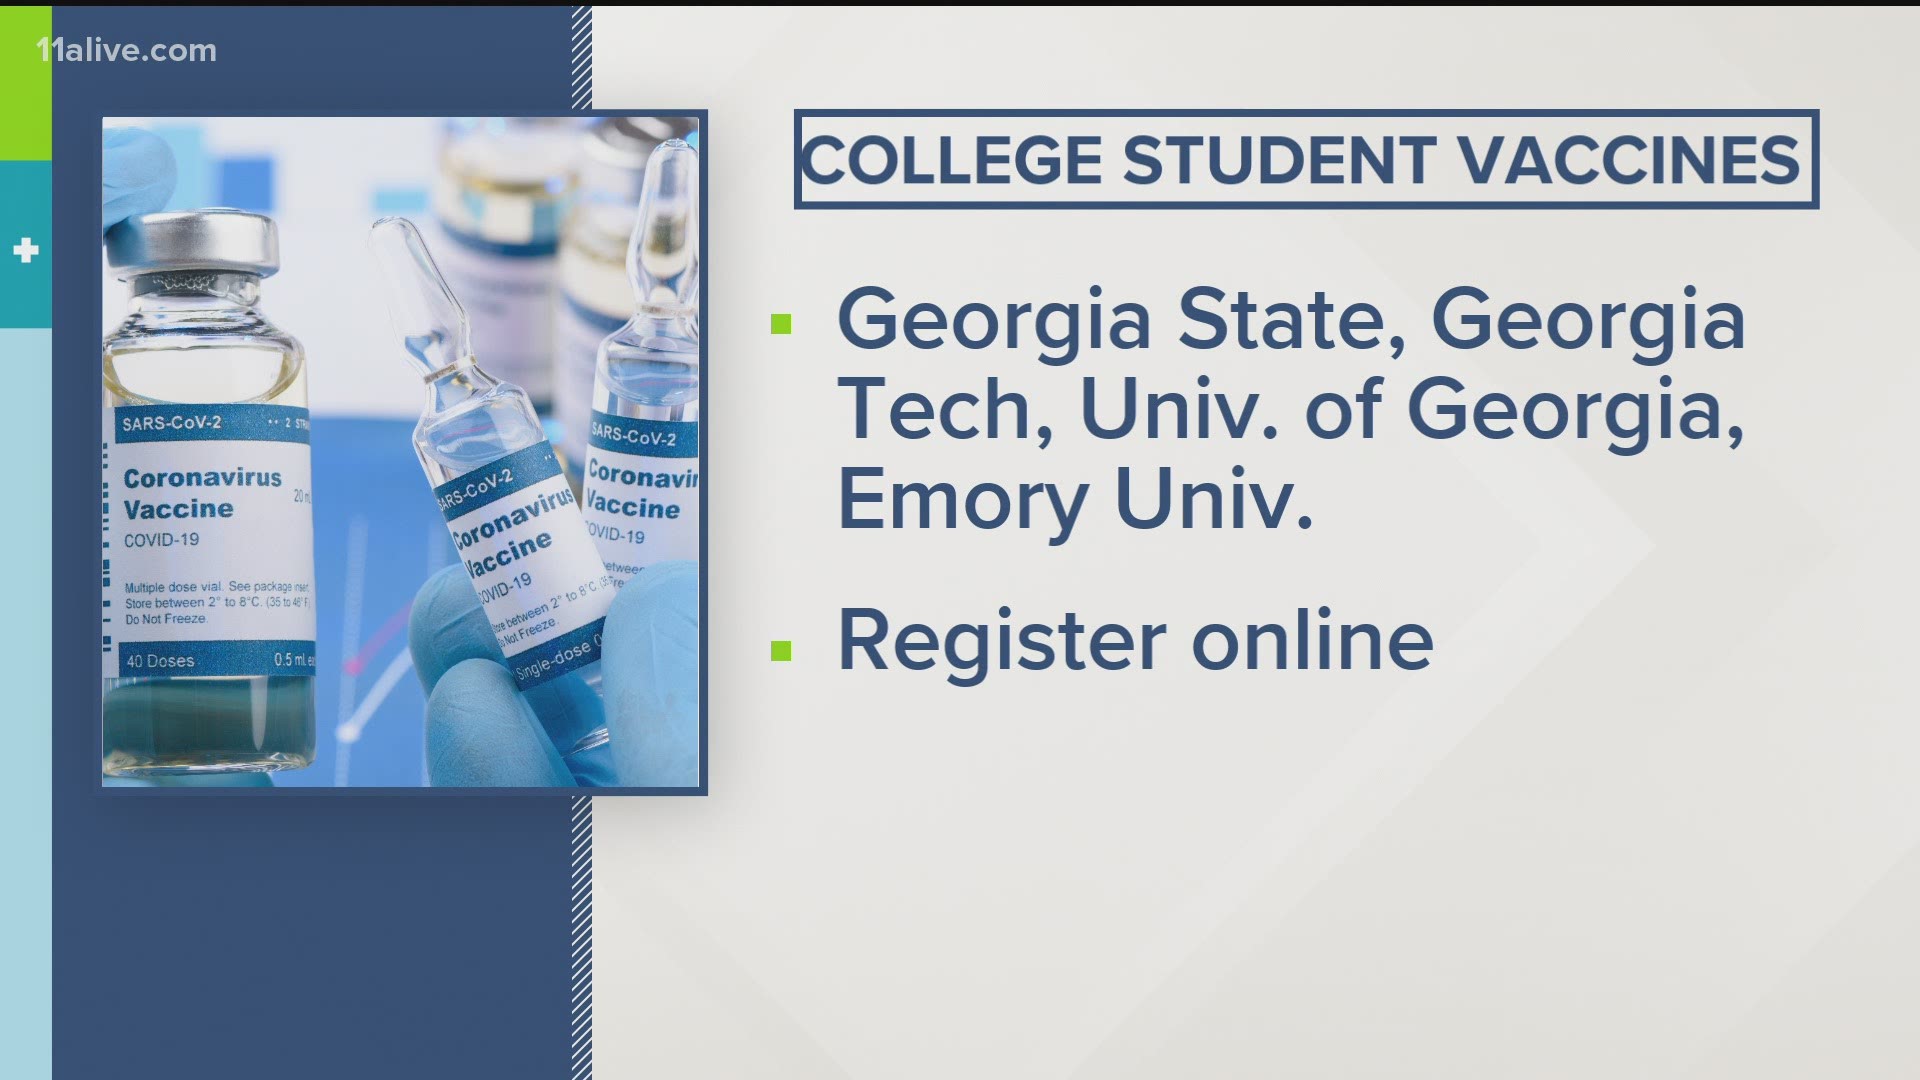 Students will be able to get the vaccine on campus at these schools.